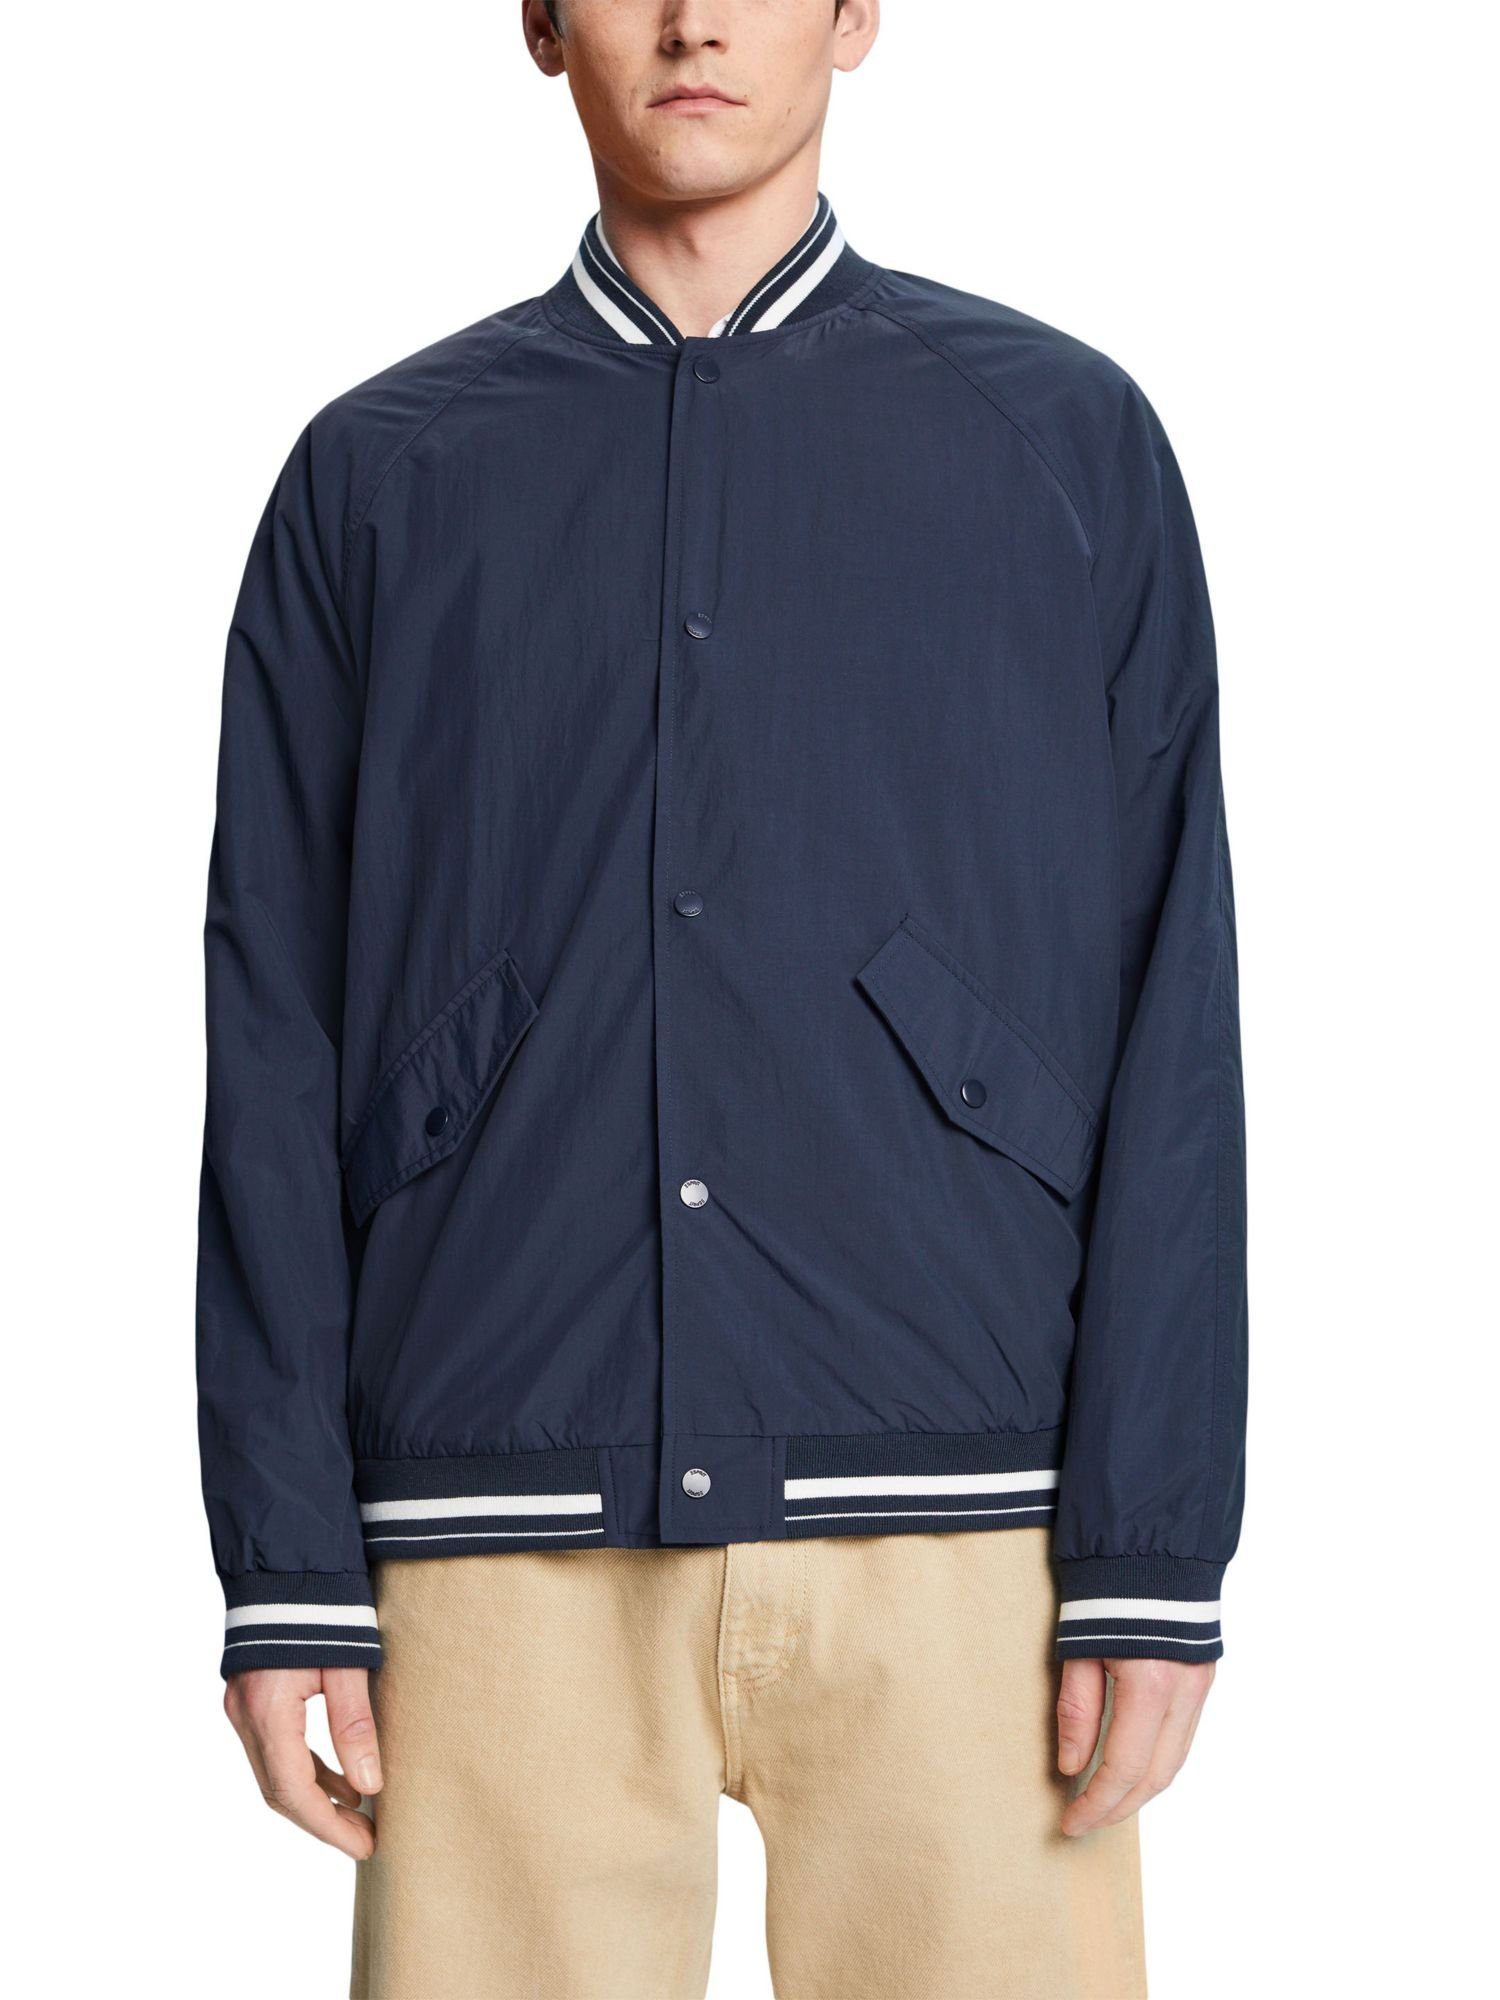 Esprit by Jackets woven edc Collegejacke outdoor